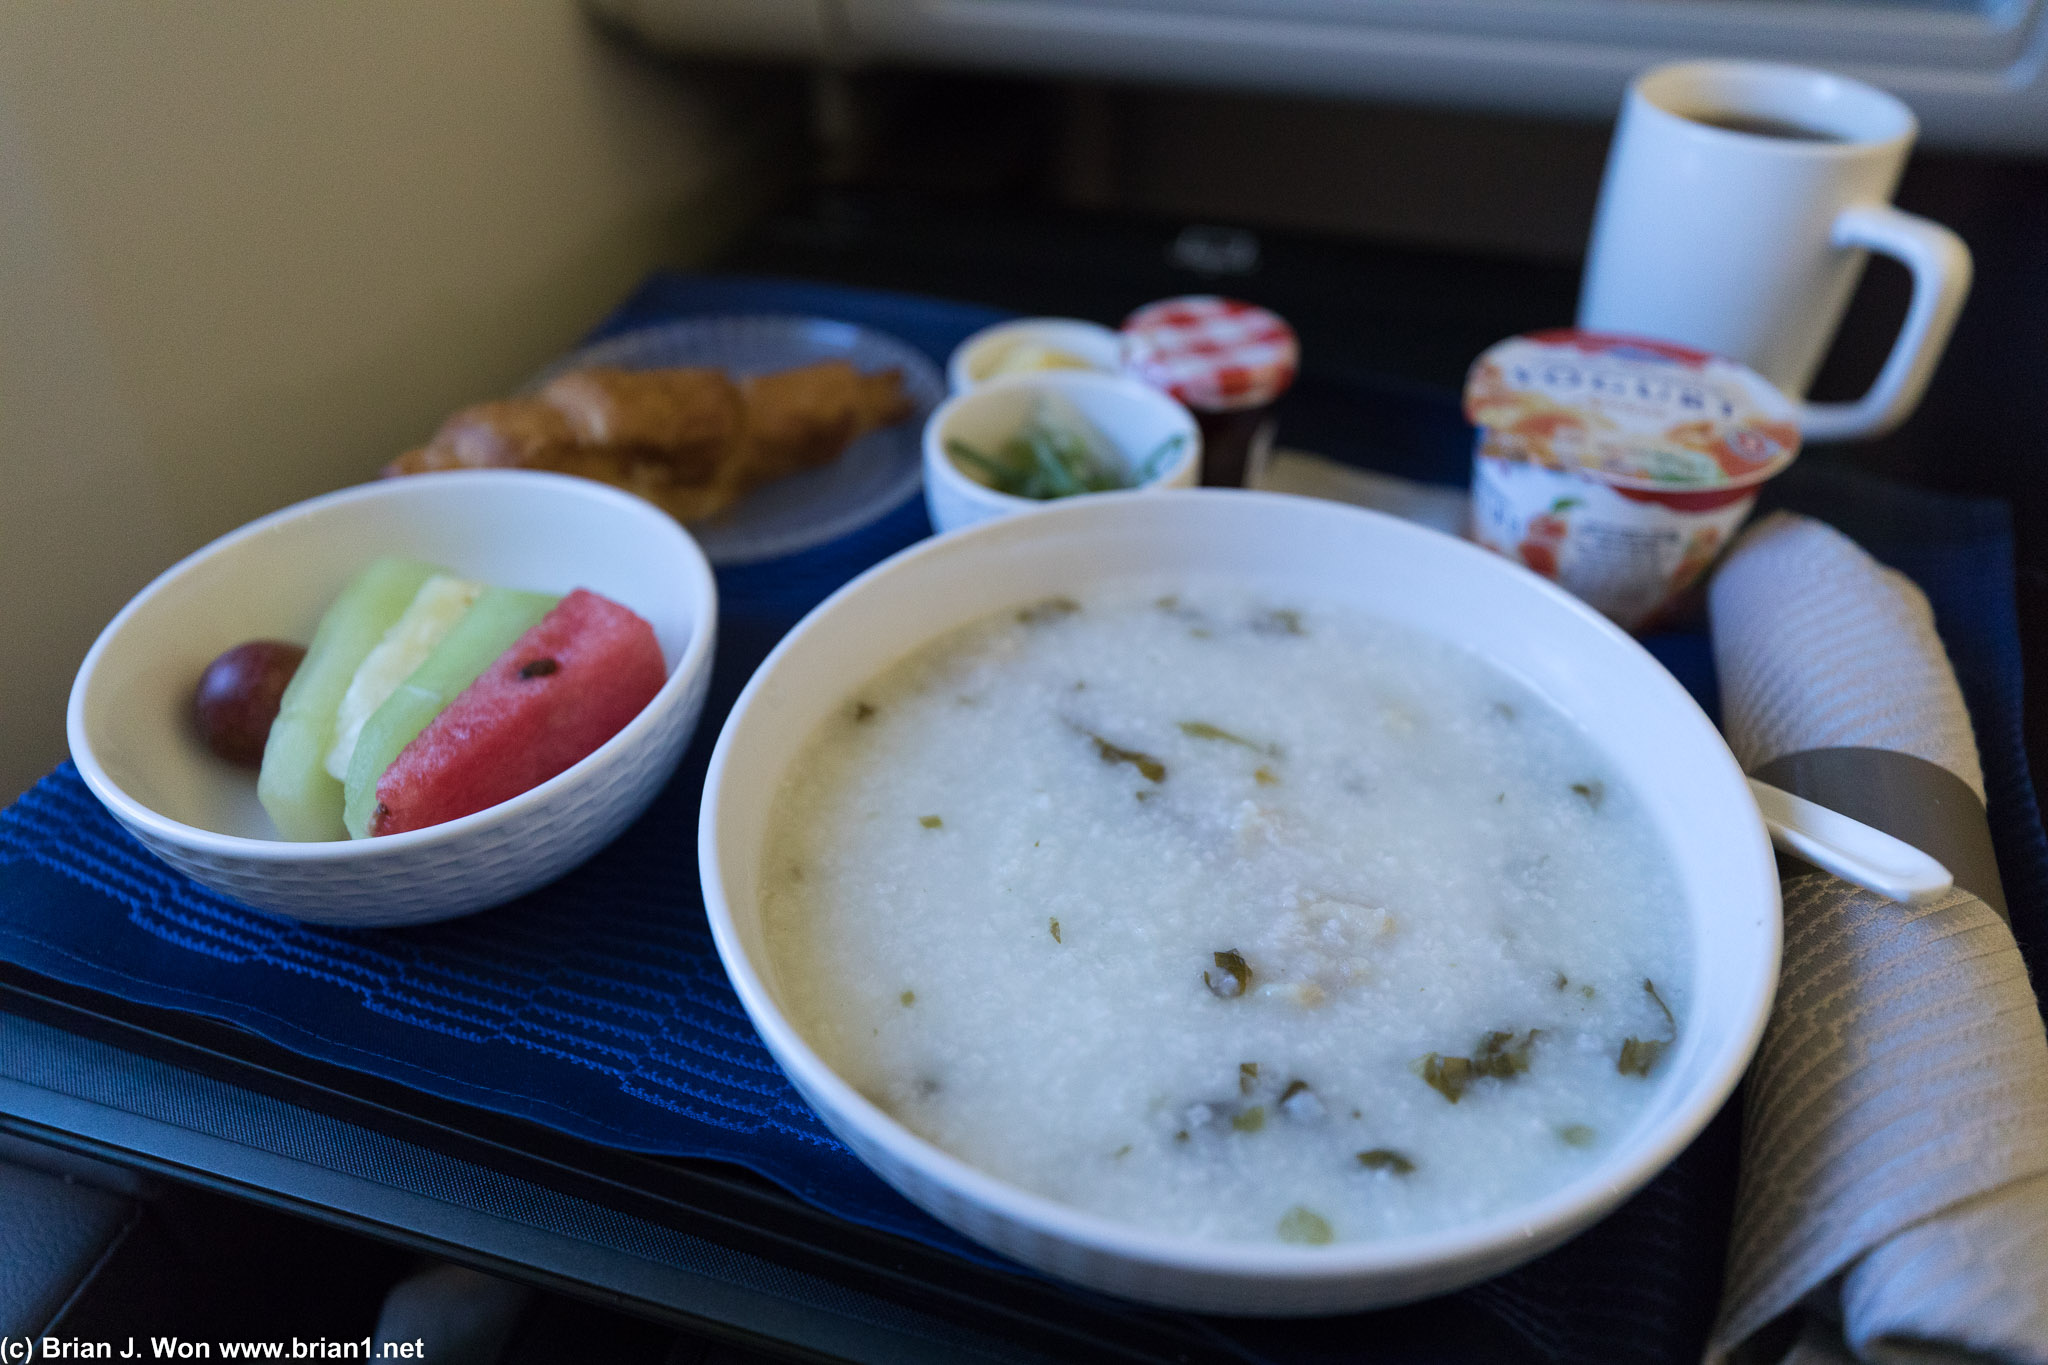 Arrival meal. The jook was actually pretty good this time.